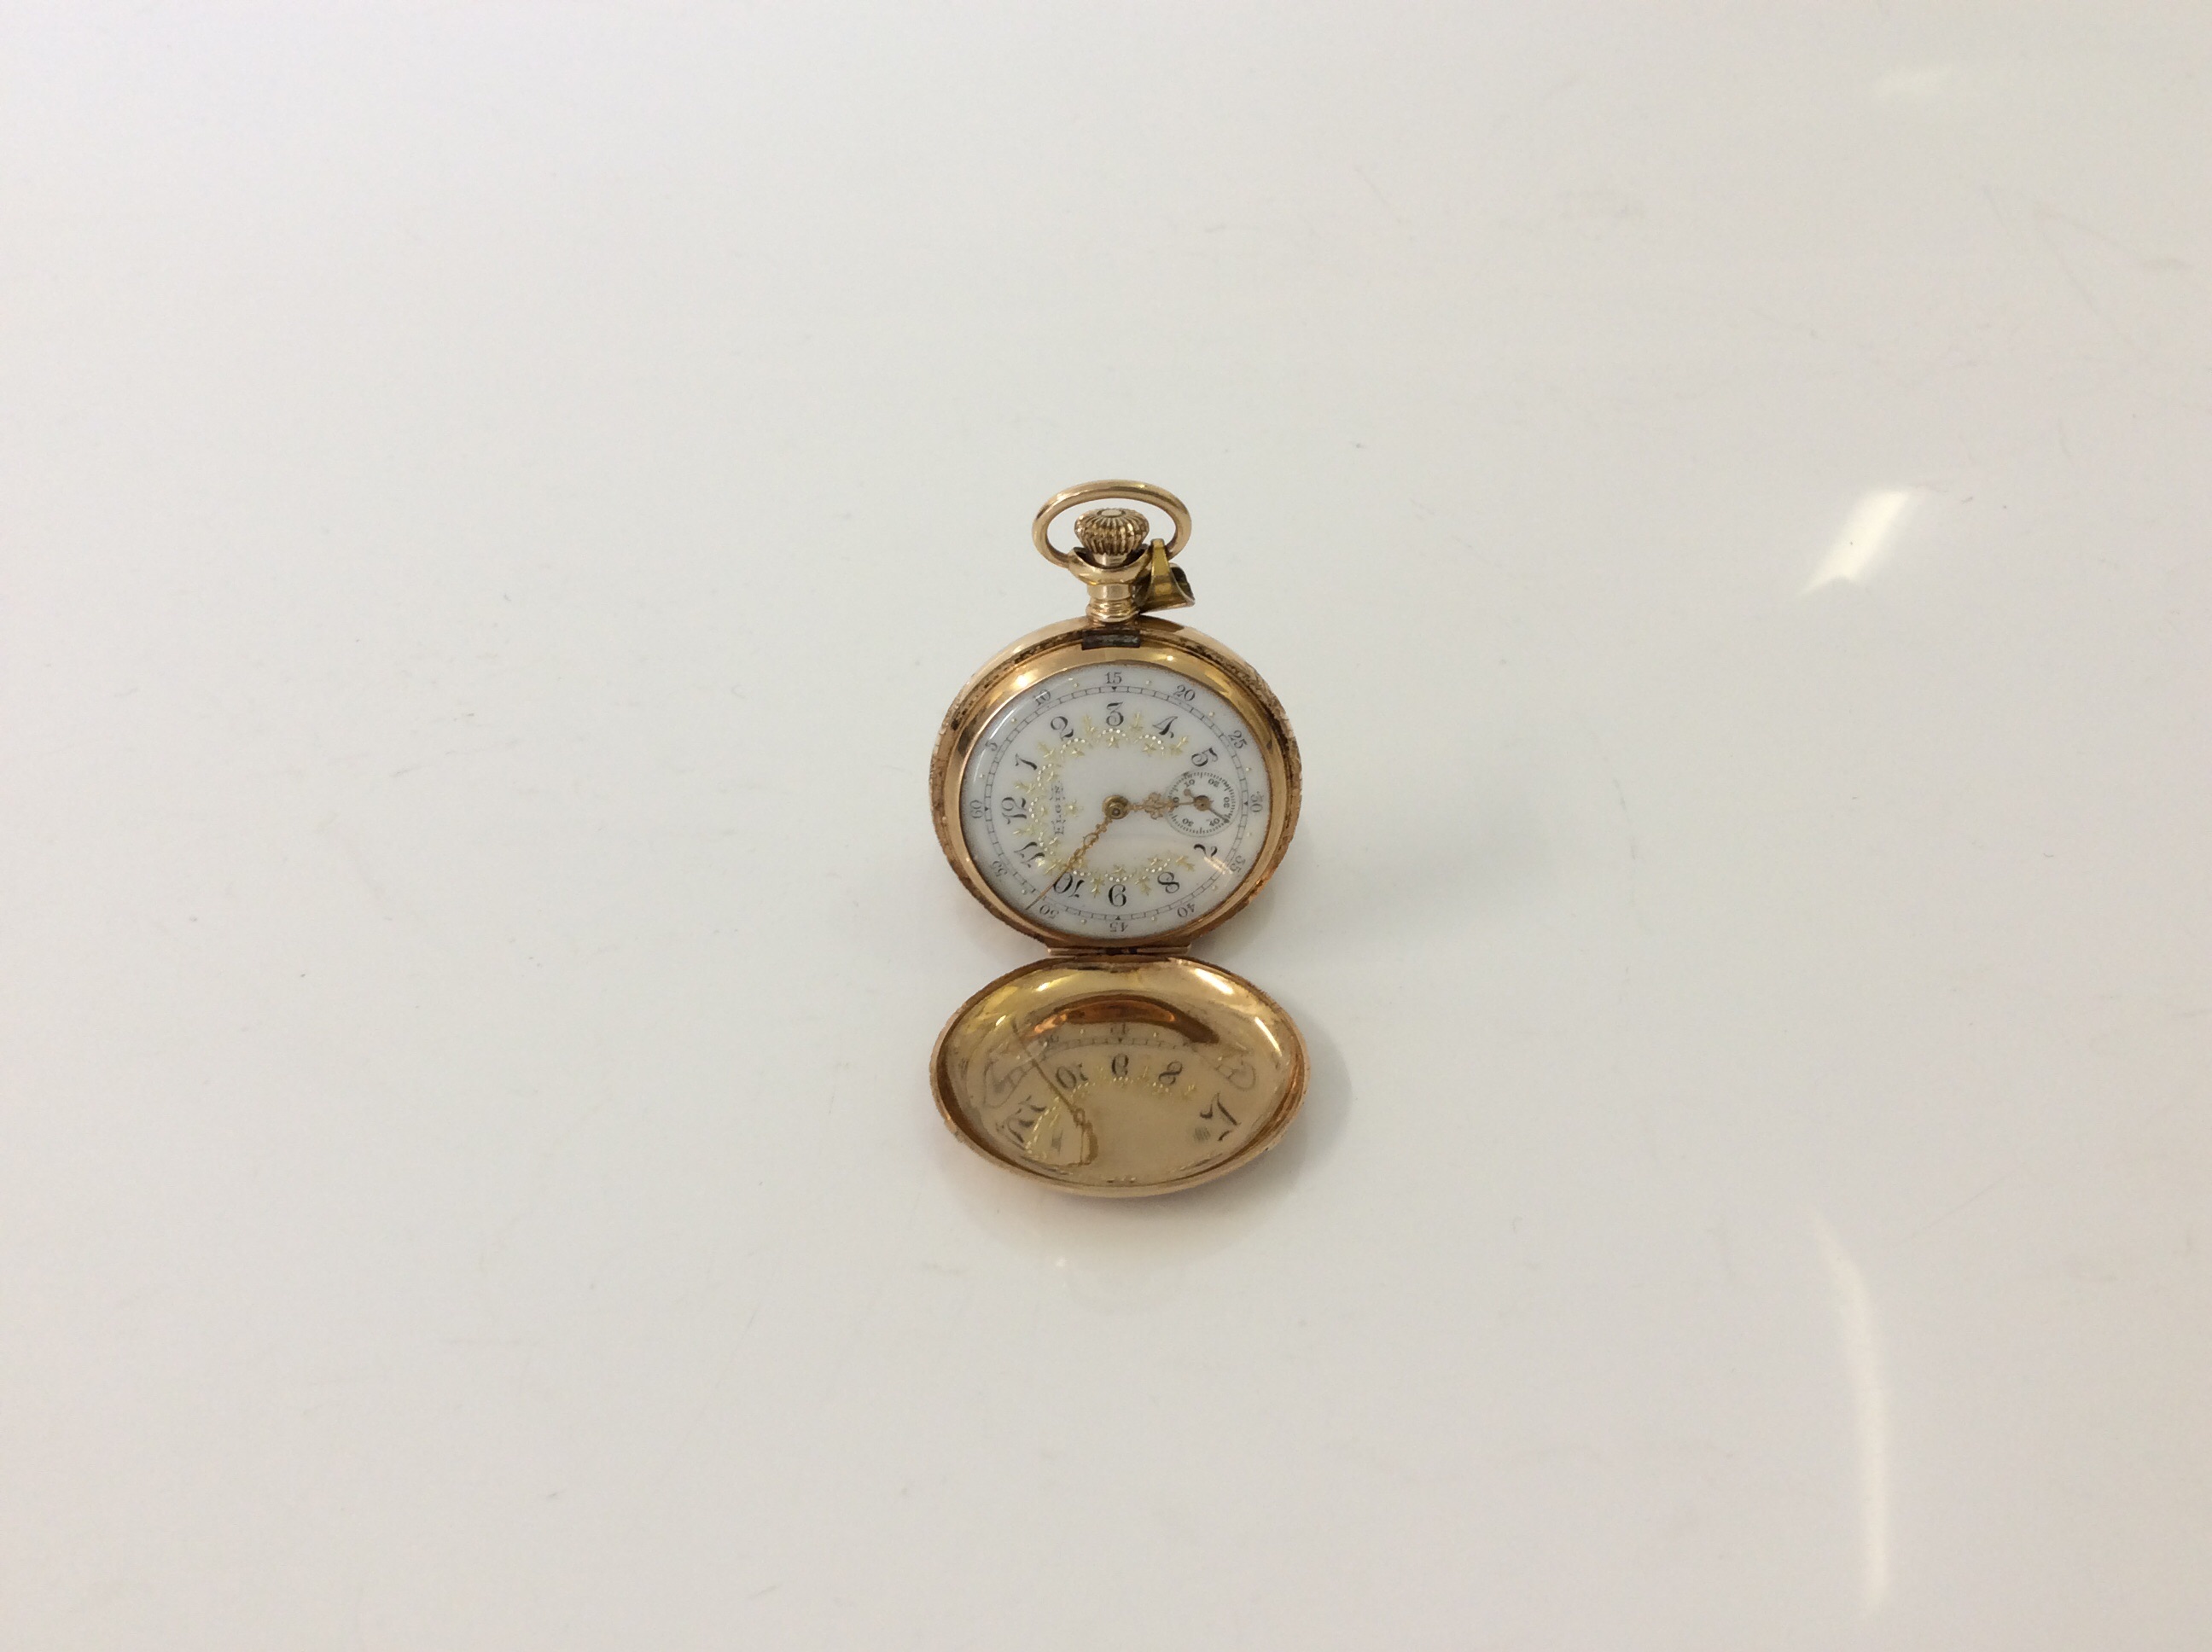 An Elgin National Watch Co. U.S.A. 14ct gold pocket watch marked 7246456, 35.5gms. Online viewing